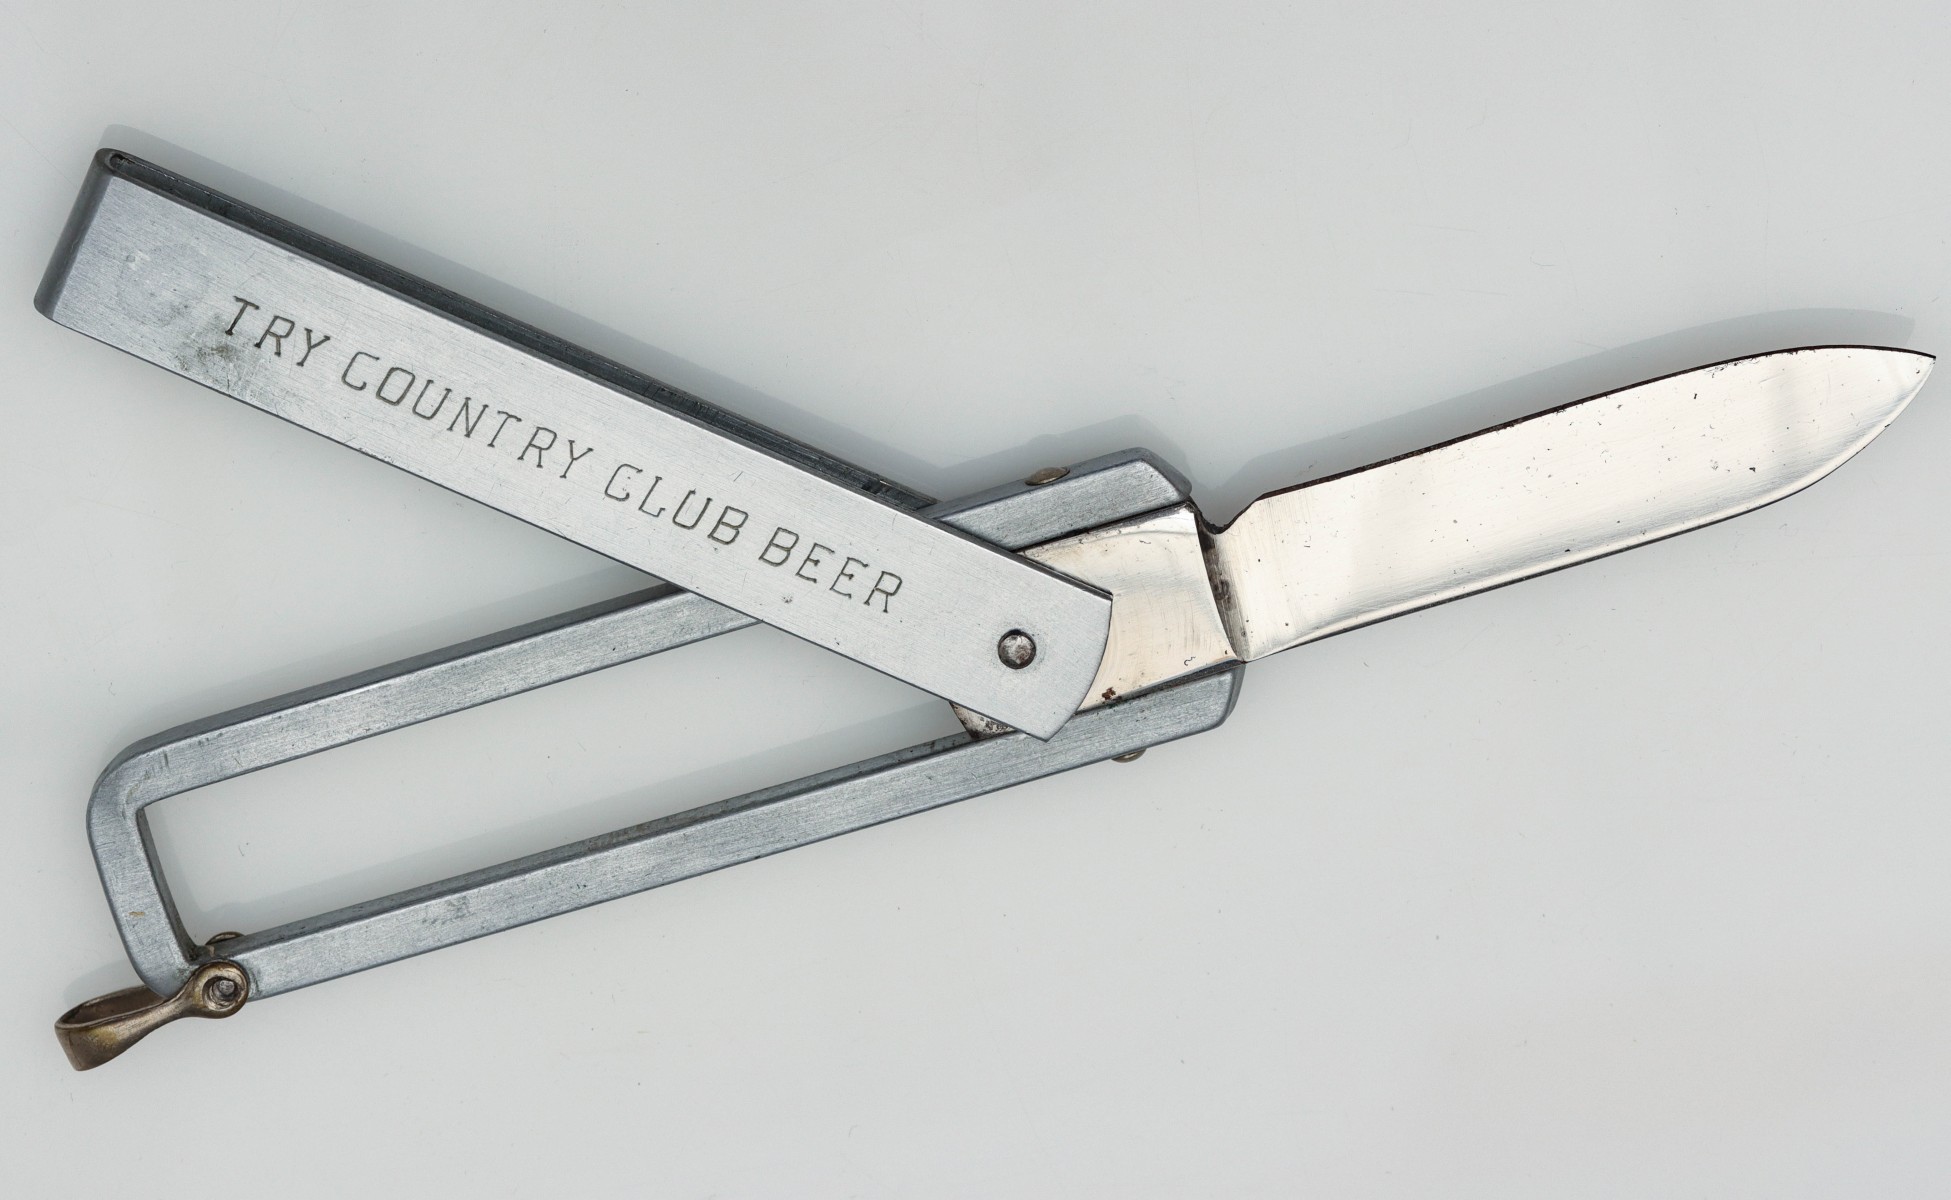 A POLLY'S POP/COUNTRY CLUB BEER ADVERTISING KNIFE